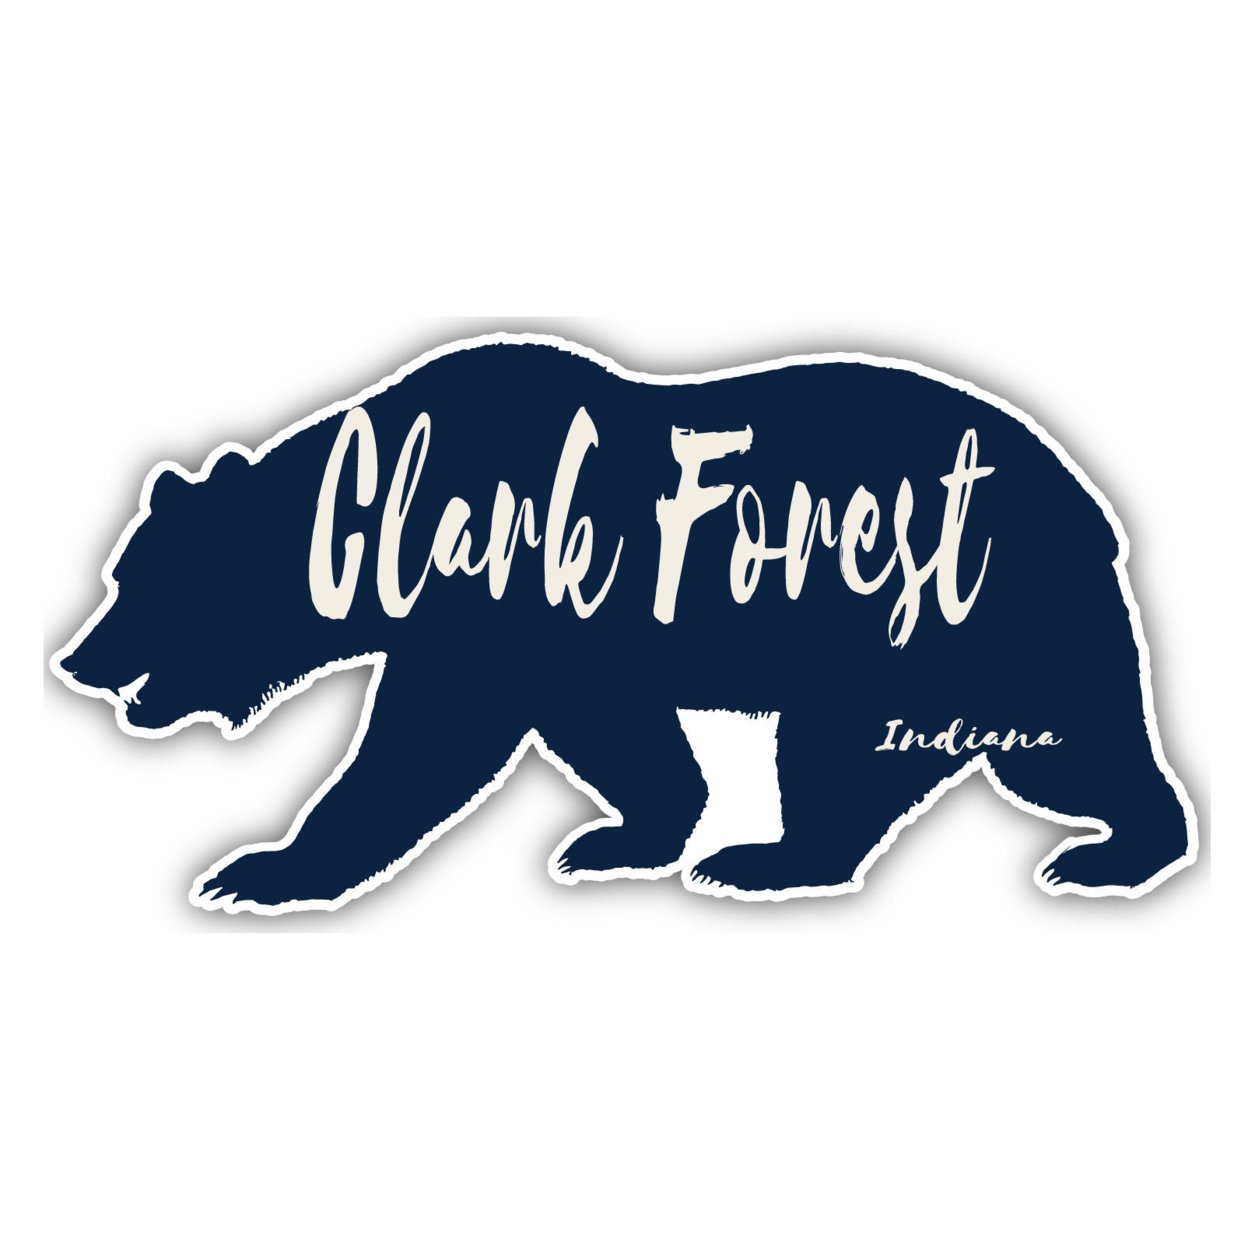 Clark Forest Indiana Souvenir Decorative Stickers (Choose Theme And Size) - 4-Pack, 4-Inch, Bear